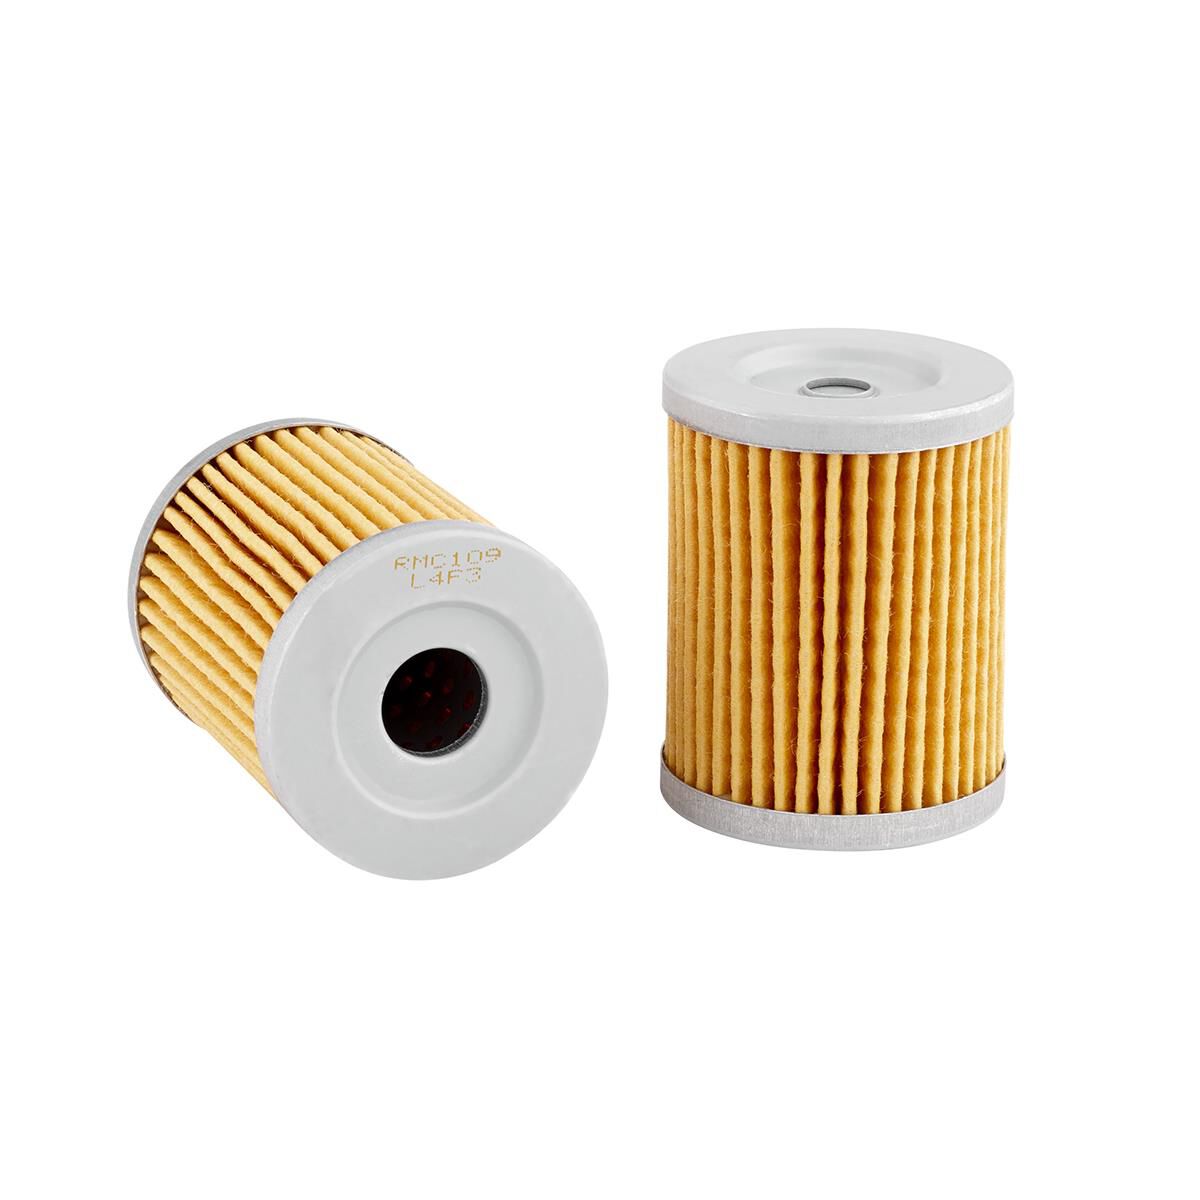 RYCO MOTORCYCLE OIL FILTER - RMC109, , scaau_hi-res